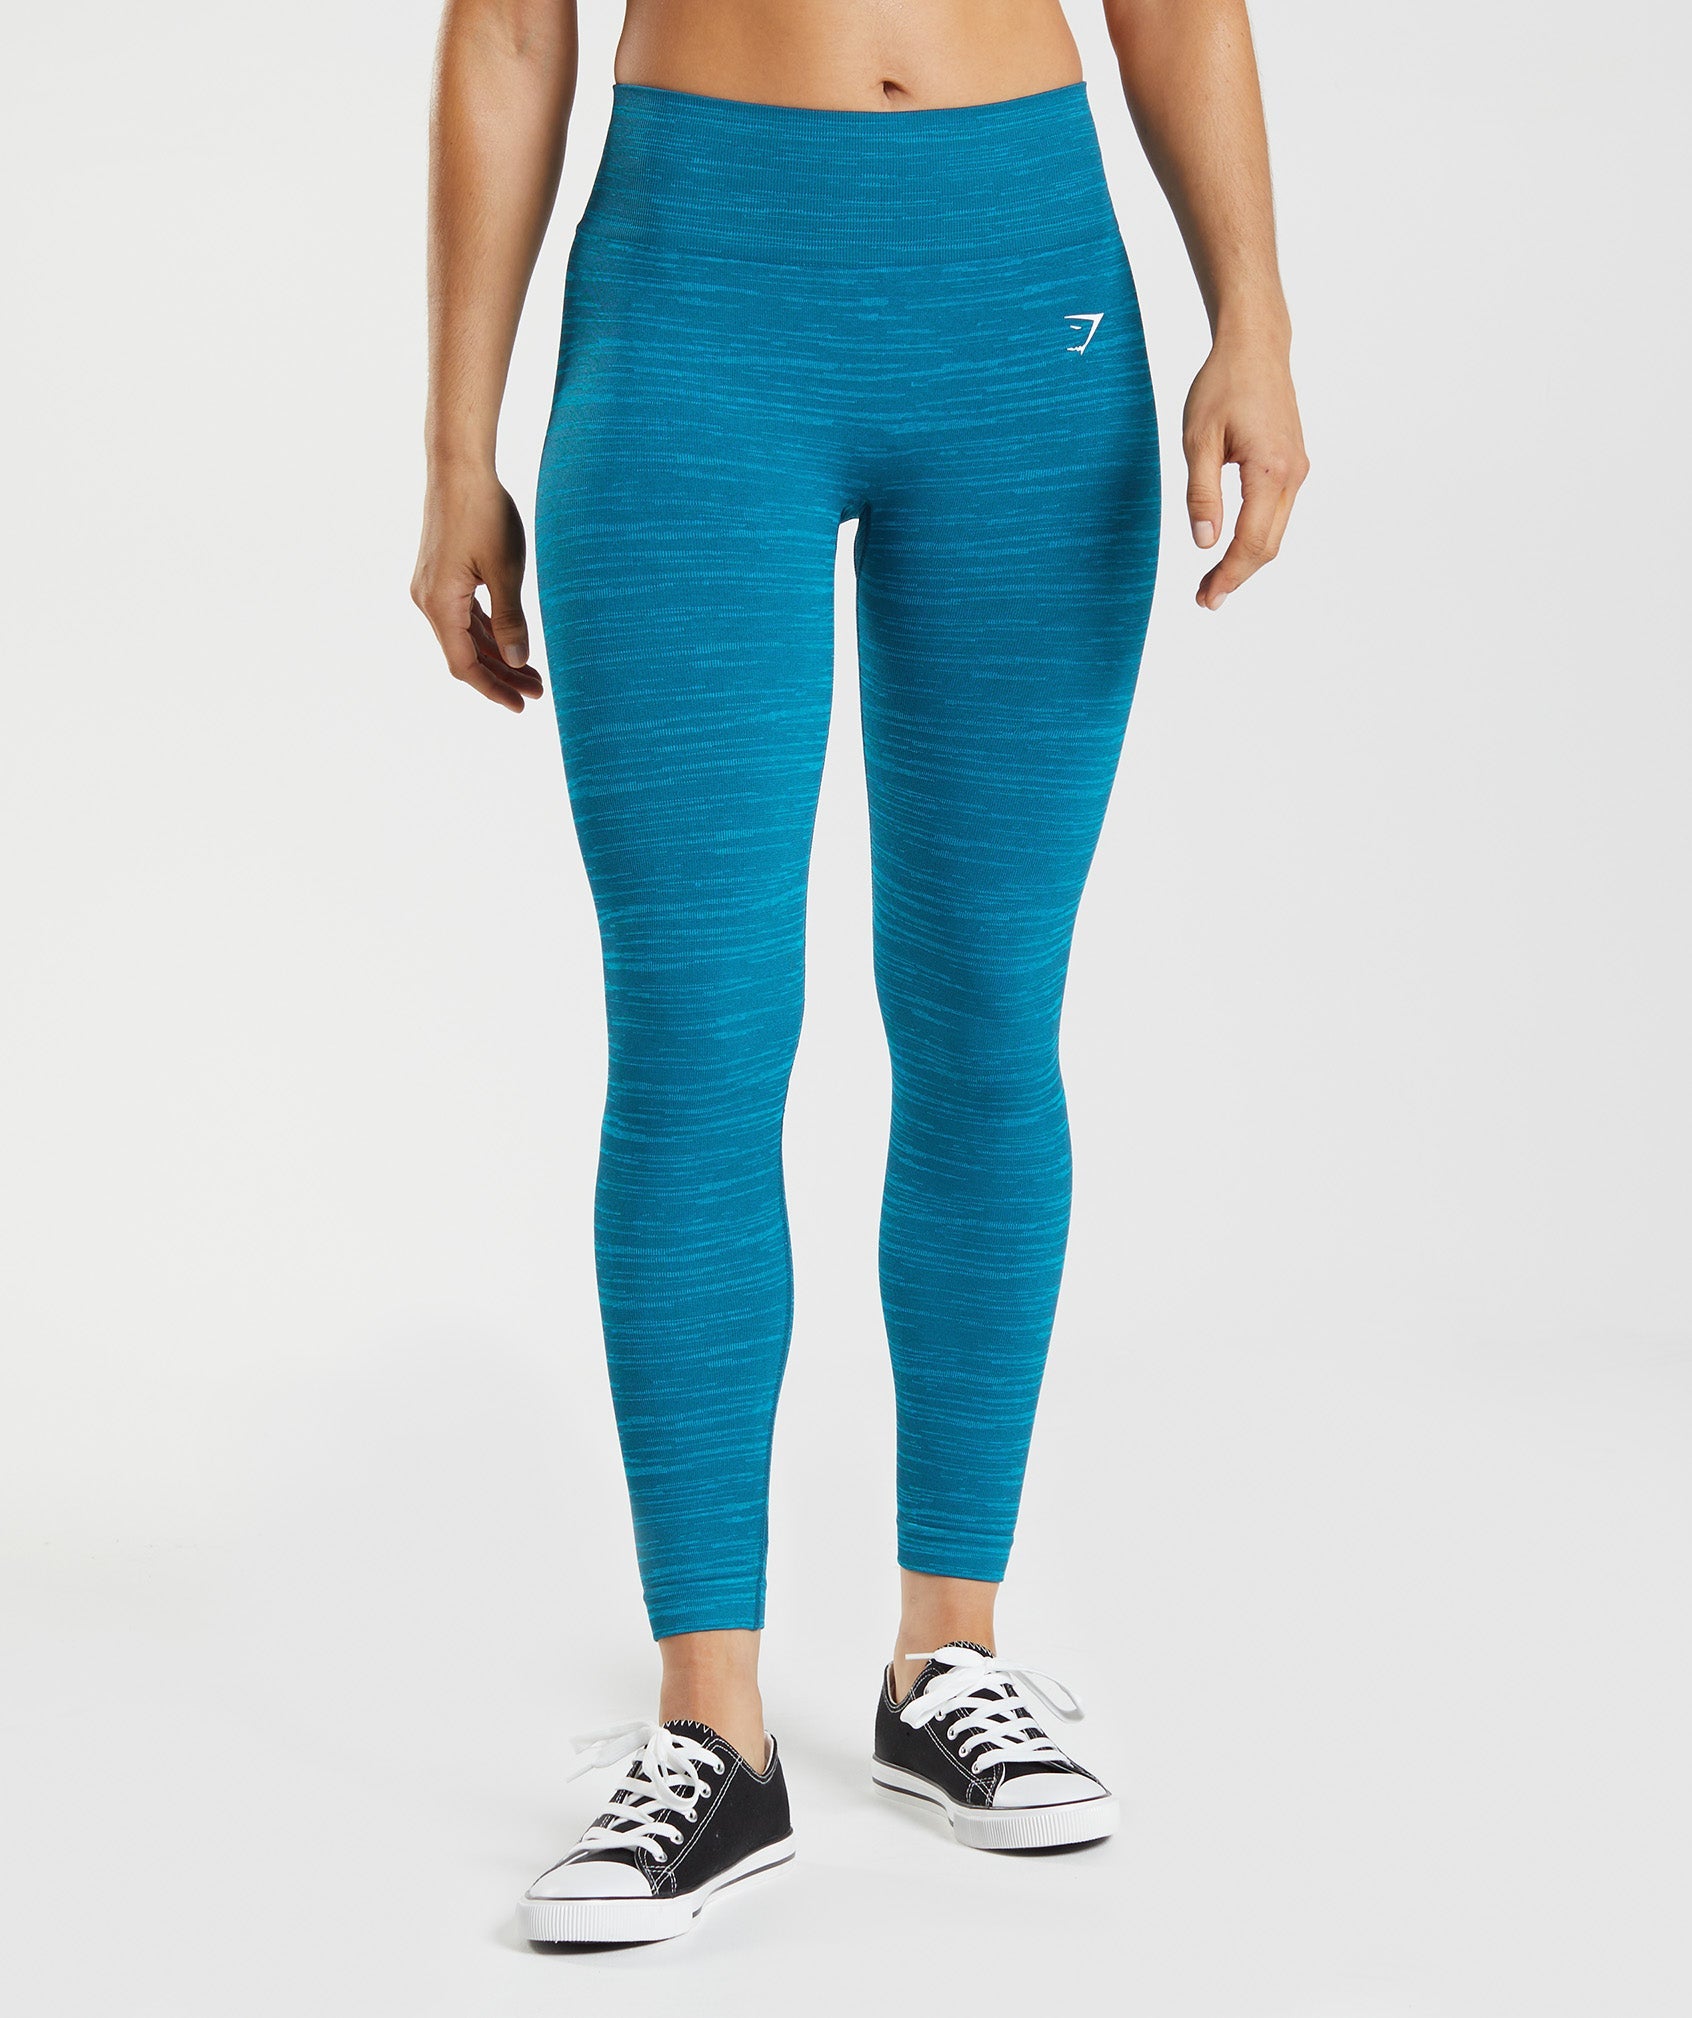 Adapt Marl Seamless Leggings in {{variantColor} is out of stock